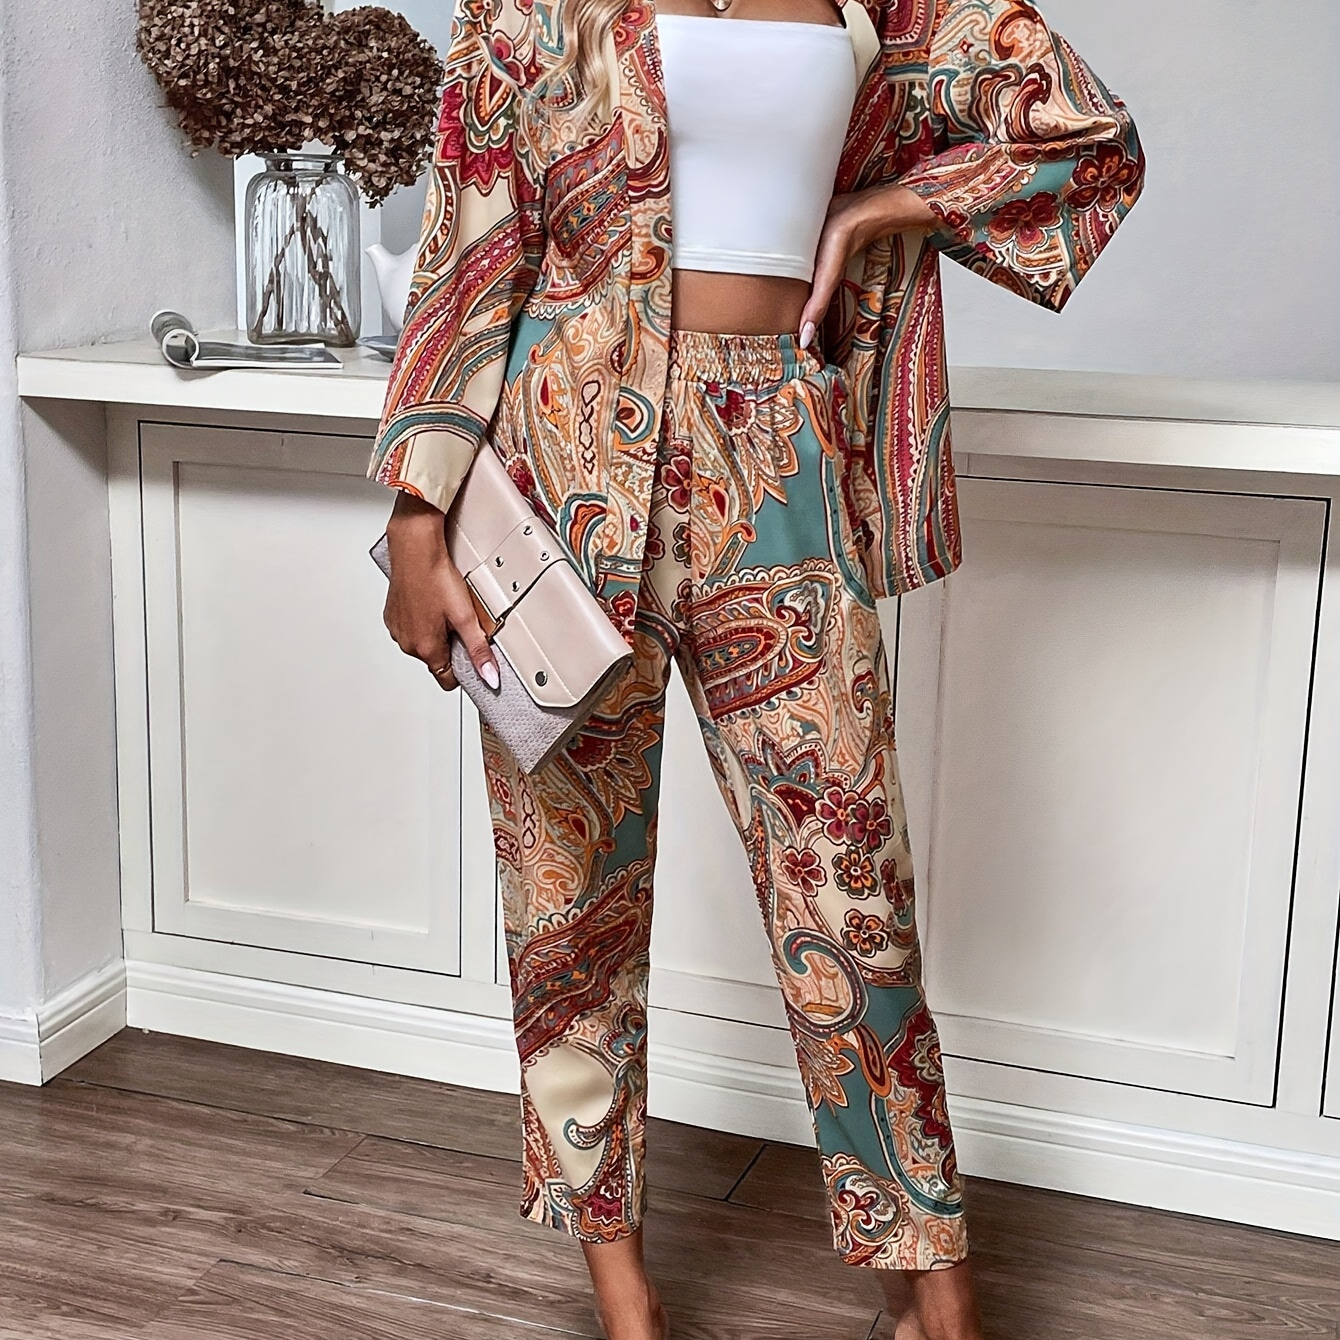 

Paisley Print Pantsuit Set, Open Front Long Sleeve Cover Up & Cropped Straight Leg Pants Outfits For Vacation & Traveling, Women's Clothing